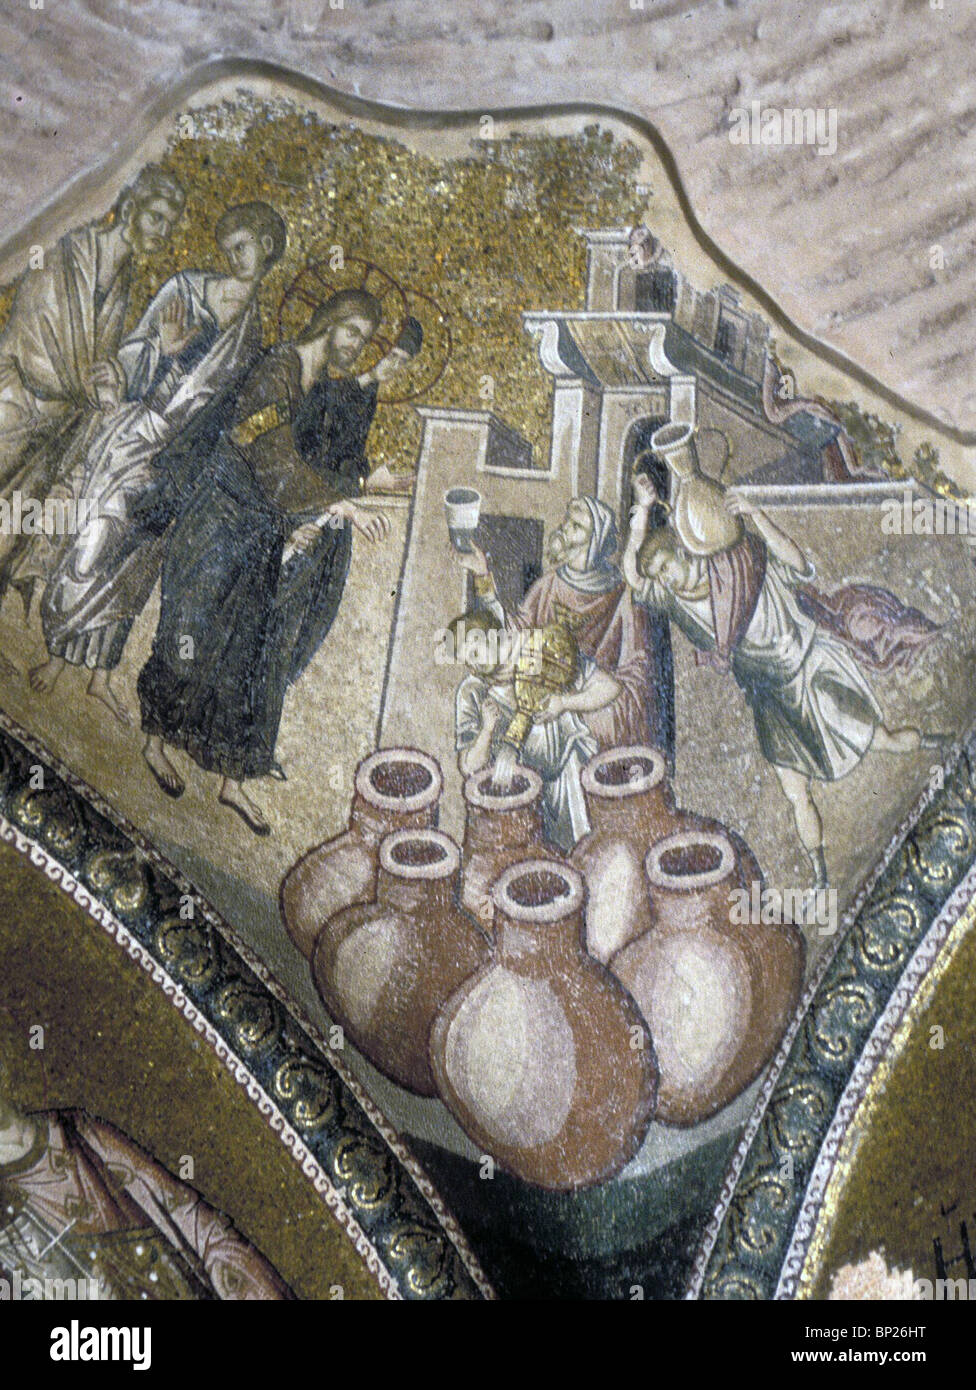 1108. THE MIRACLE OF THE WINE AT THE WEDDING IN CANA, 13TH. C. FRESCO FROM THE BYZANTINE CHURCH CHORA IN ISTAMBUL Stock Photo